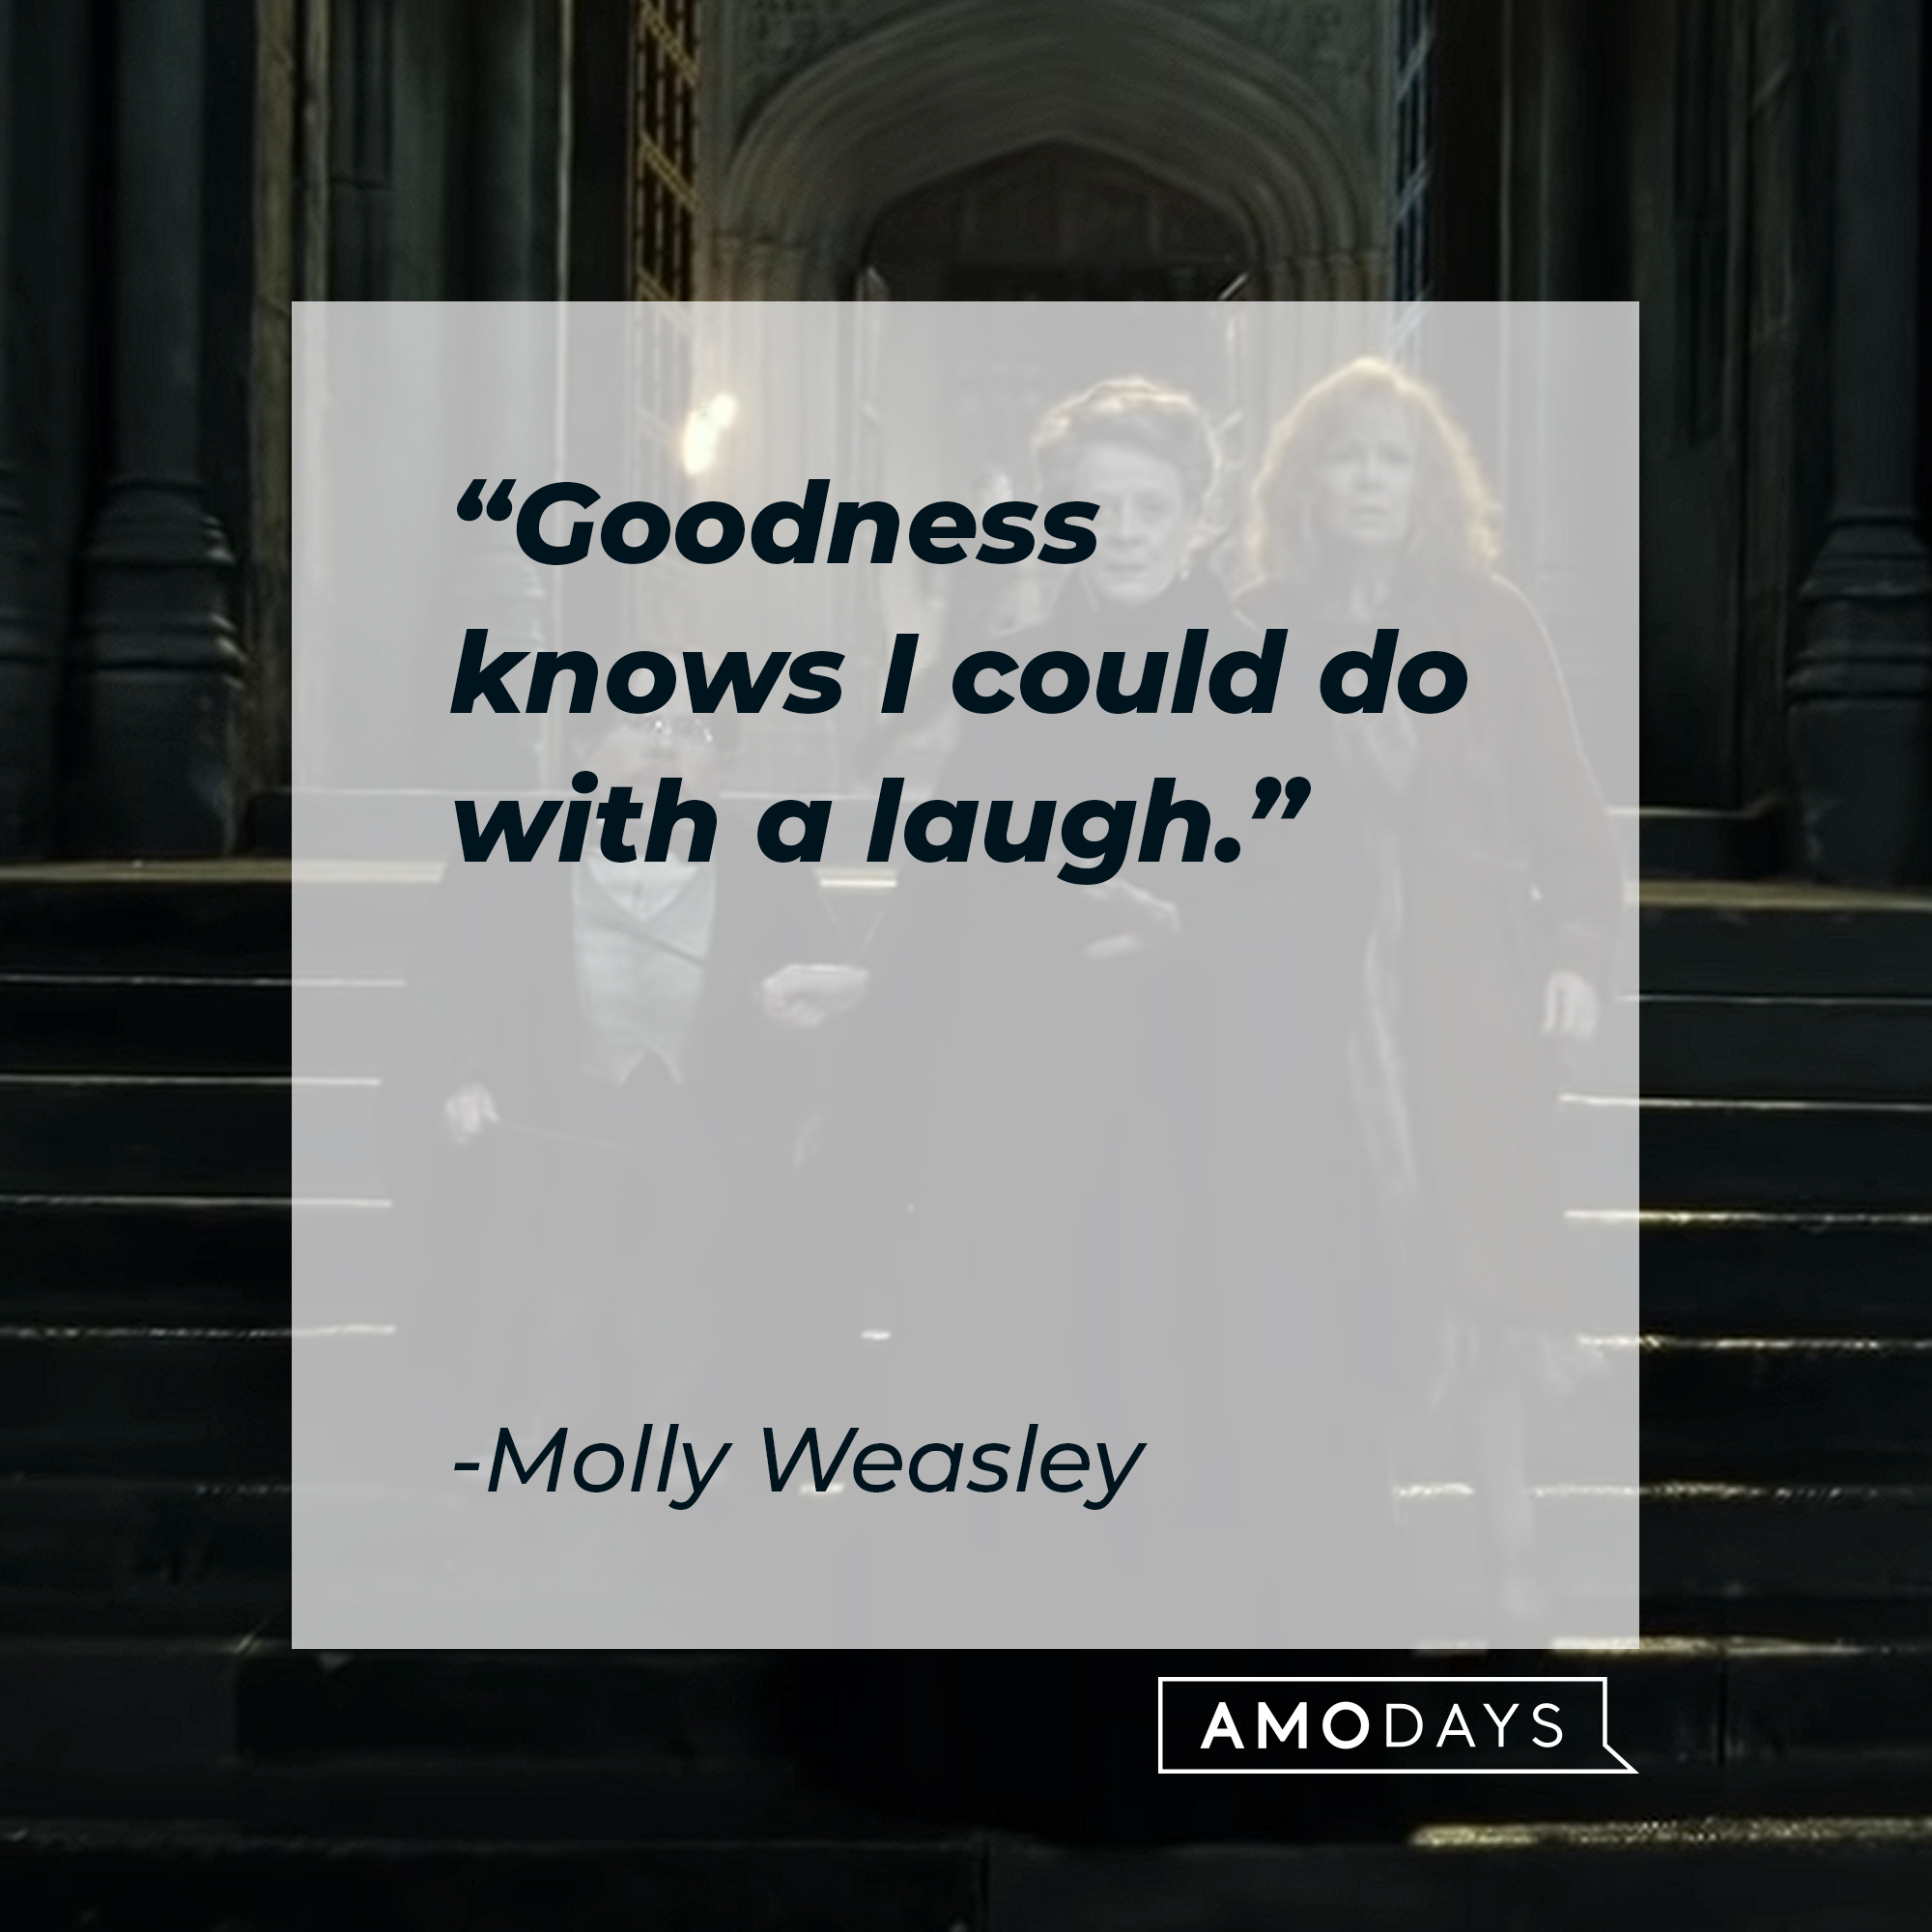 Molly Weasley's quote: "Goodness knows I could do with a laugh." | Source: Youtube.com/harrypotter